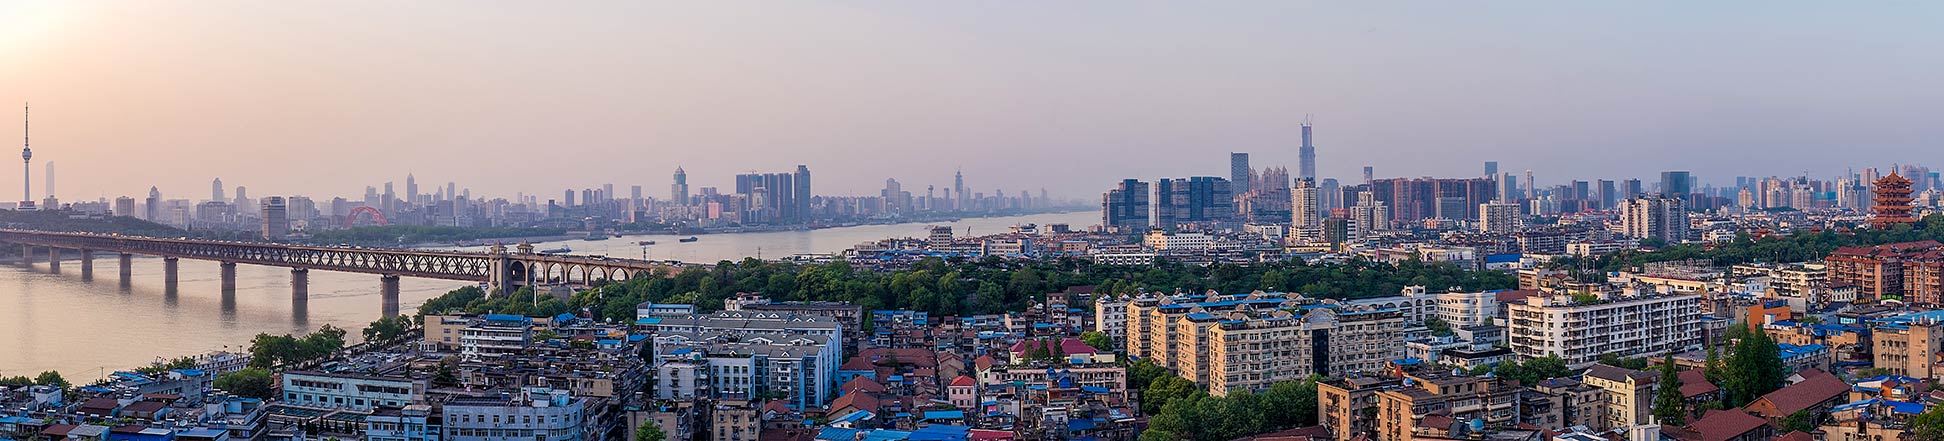 Panorama view of Wuhan, the capital of Hubei province on the Yangtze river